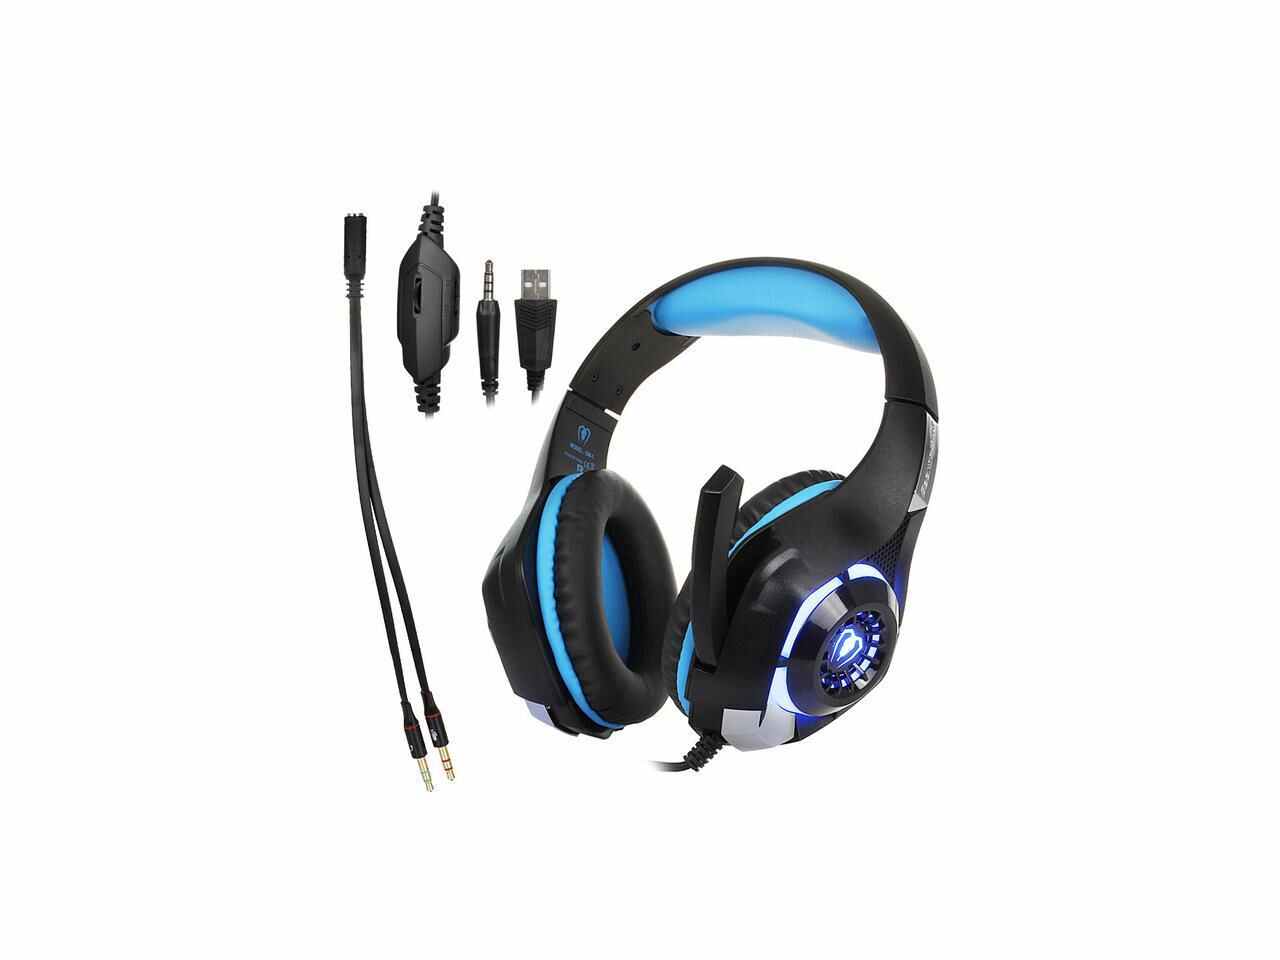 Beexcellent GM-1 Sport Gaming Headset Stereo Bass Headphone Earphone Over Ear 3.5mm with Microphone LED Light Noise Reduction